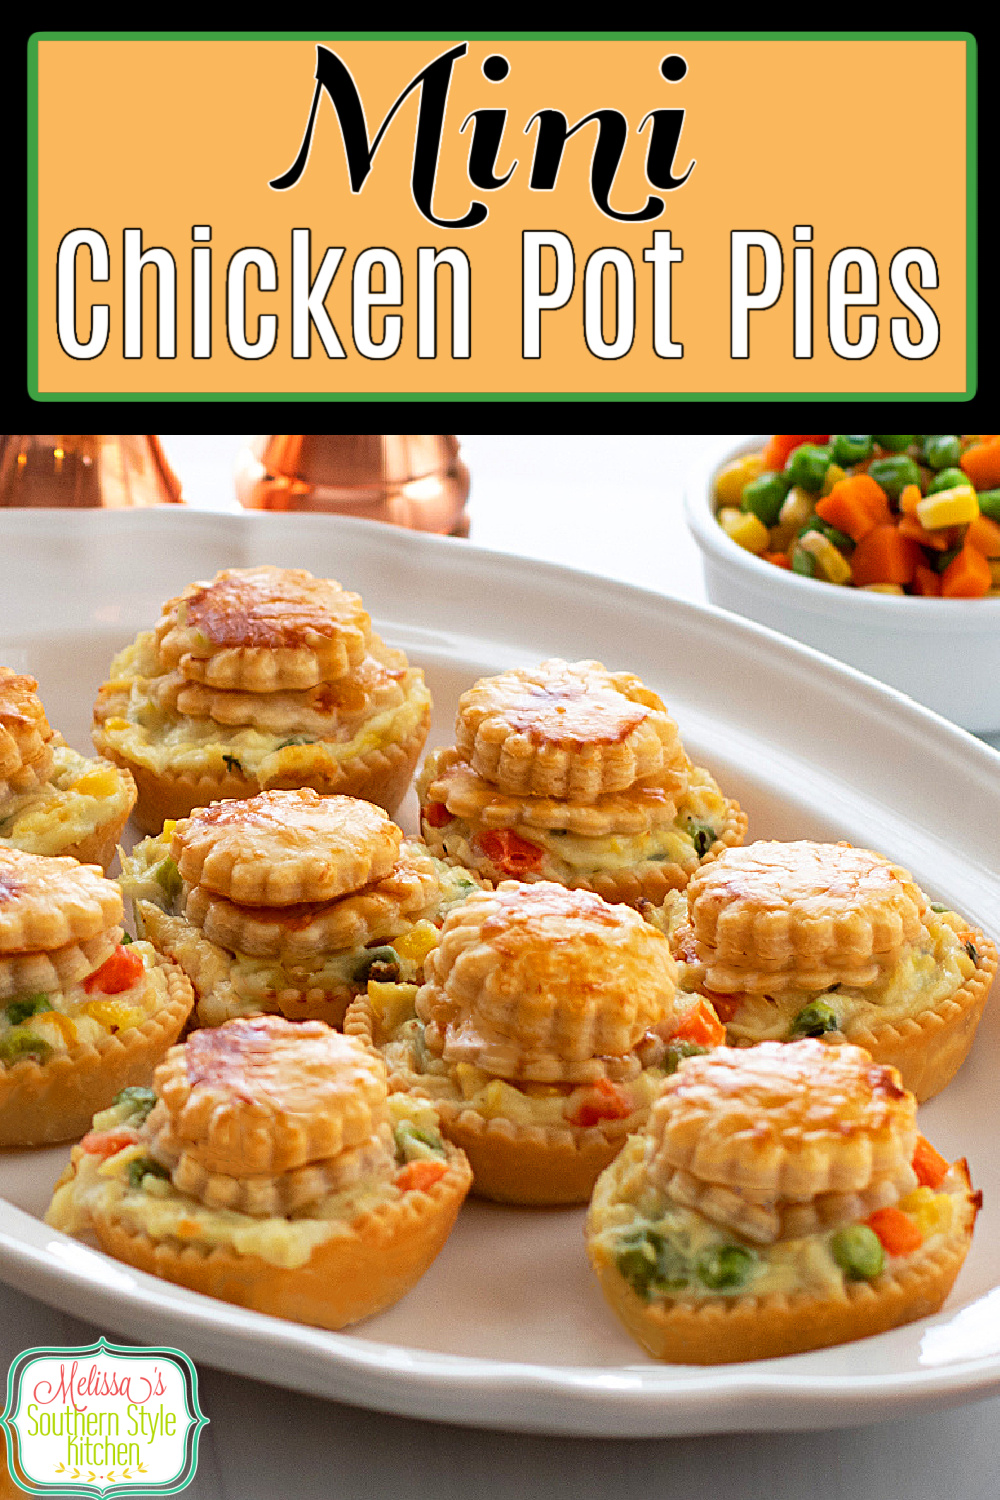 These Mini Chicken Pot Pies are perfect when you're cooking for one or two people or those times when a single serving entrée is on the menu #chickenpotpie #minipotpies #bestchickenpotpierecipe #easychickenrecipes #muffinpanrecipes #minichickenpotpies #southernchickenpotpierecipe #southernrecipes via @melissasssk